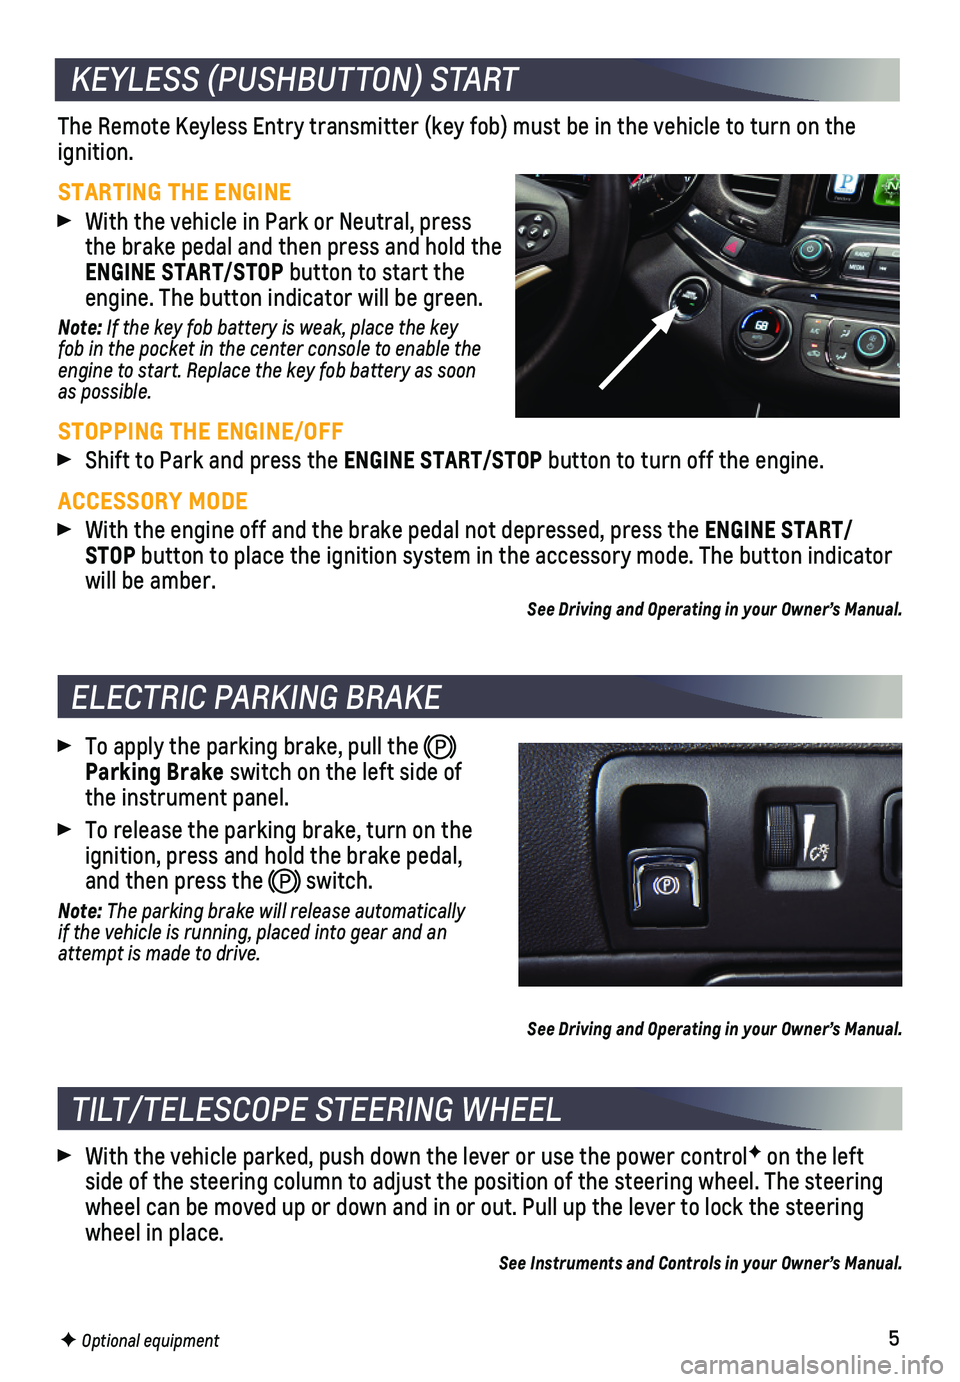 CHEVROLET IMPALA 2020  Get To Know Guide 5
ELECTRIC PARKING BRAKE
 To apply the parking brake, pull the  Parking Brake switch on the left side of the instrument panel.
 To release the parking brake, turn on the ignition, press and hold the b